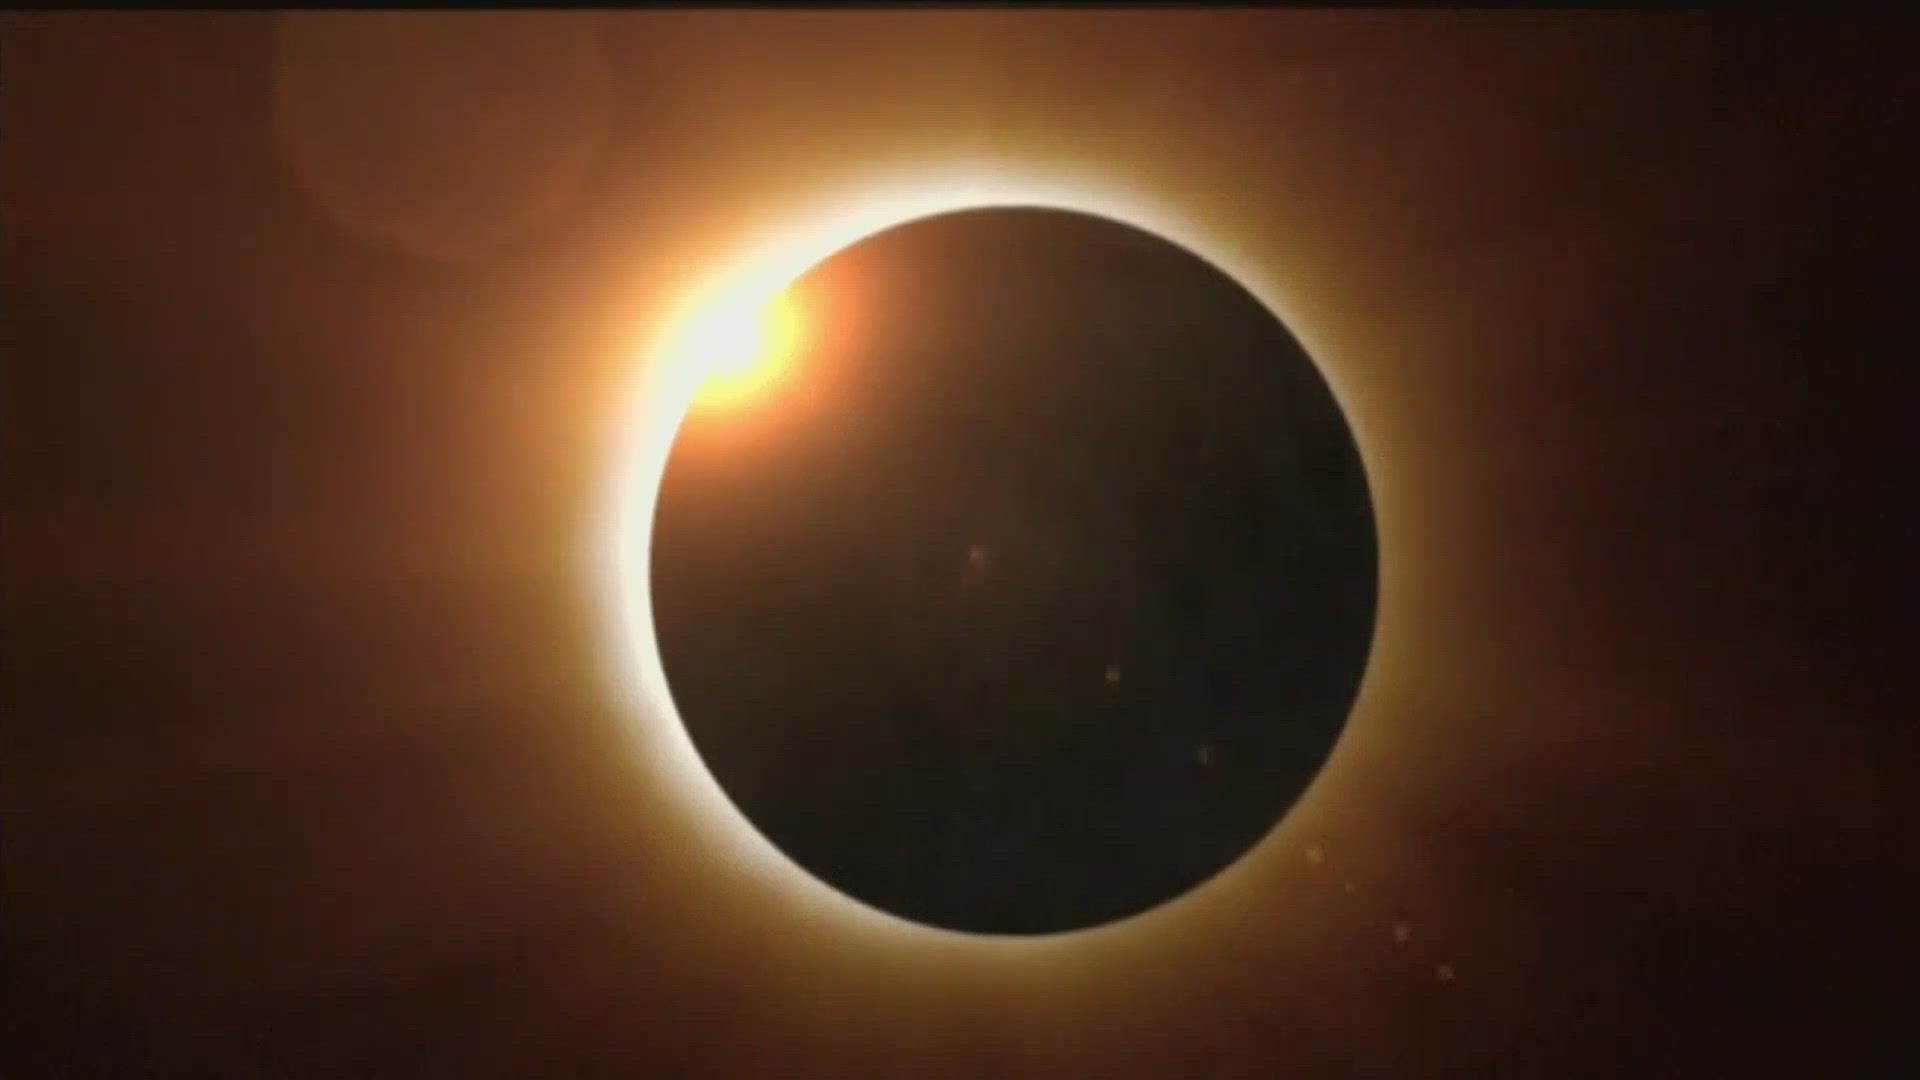 Tickets on sale to see total solar eclipse at IMS